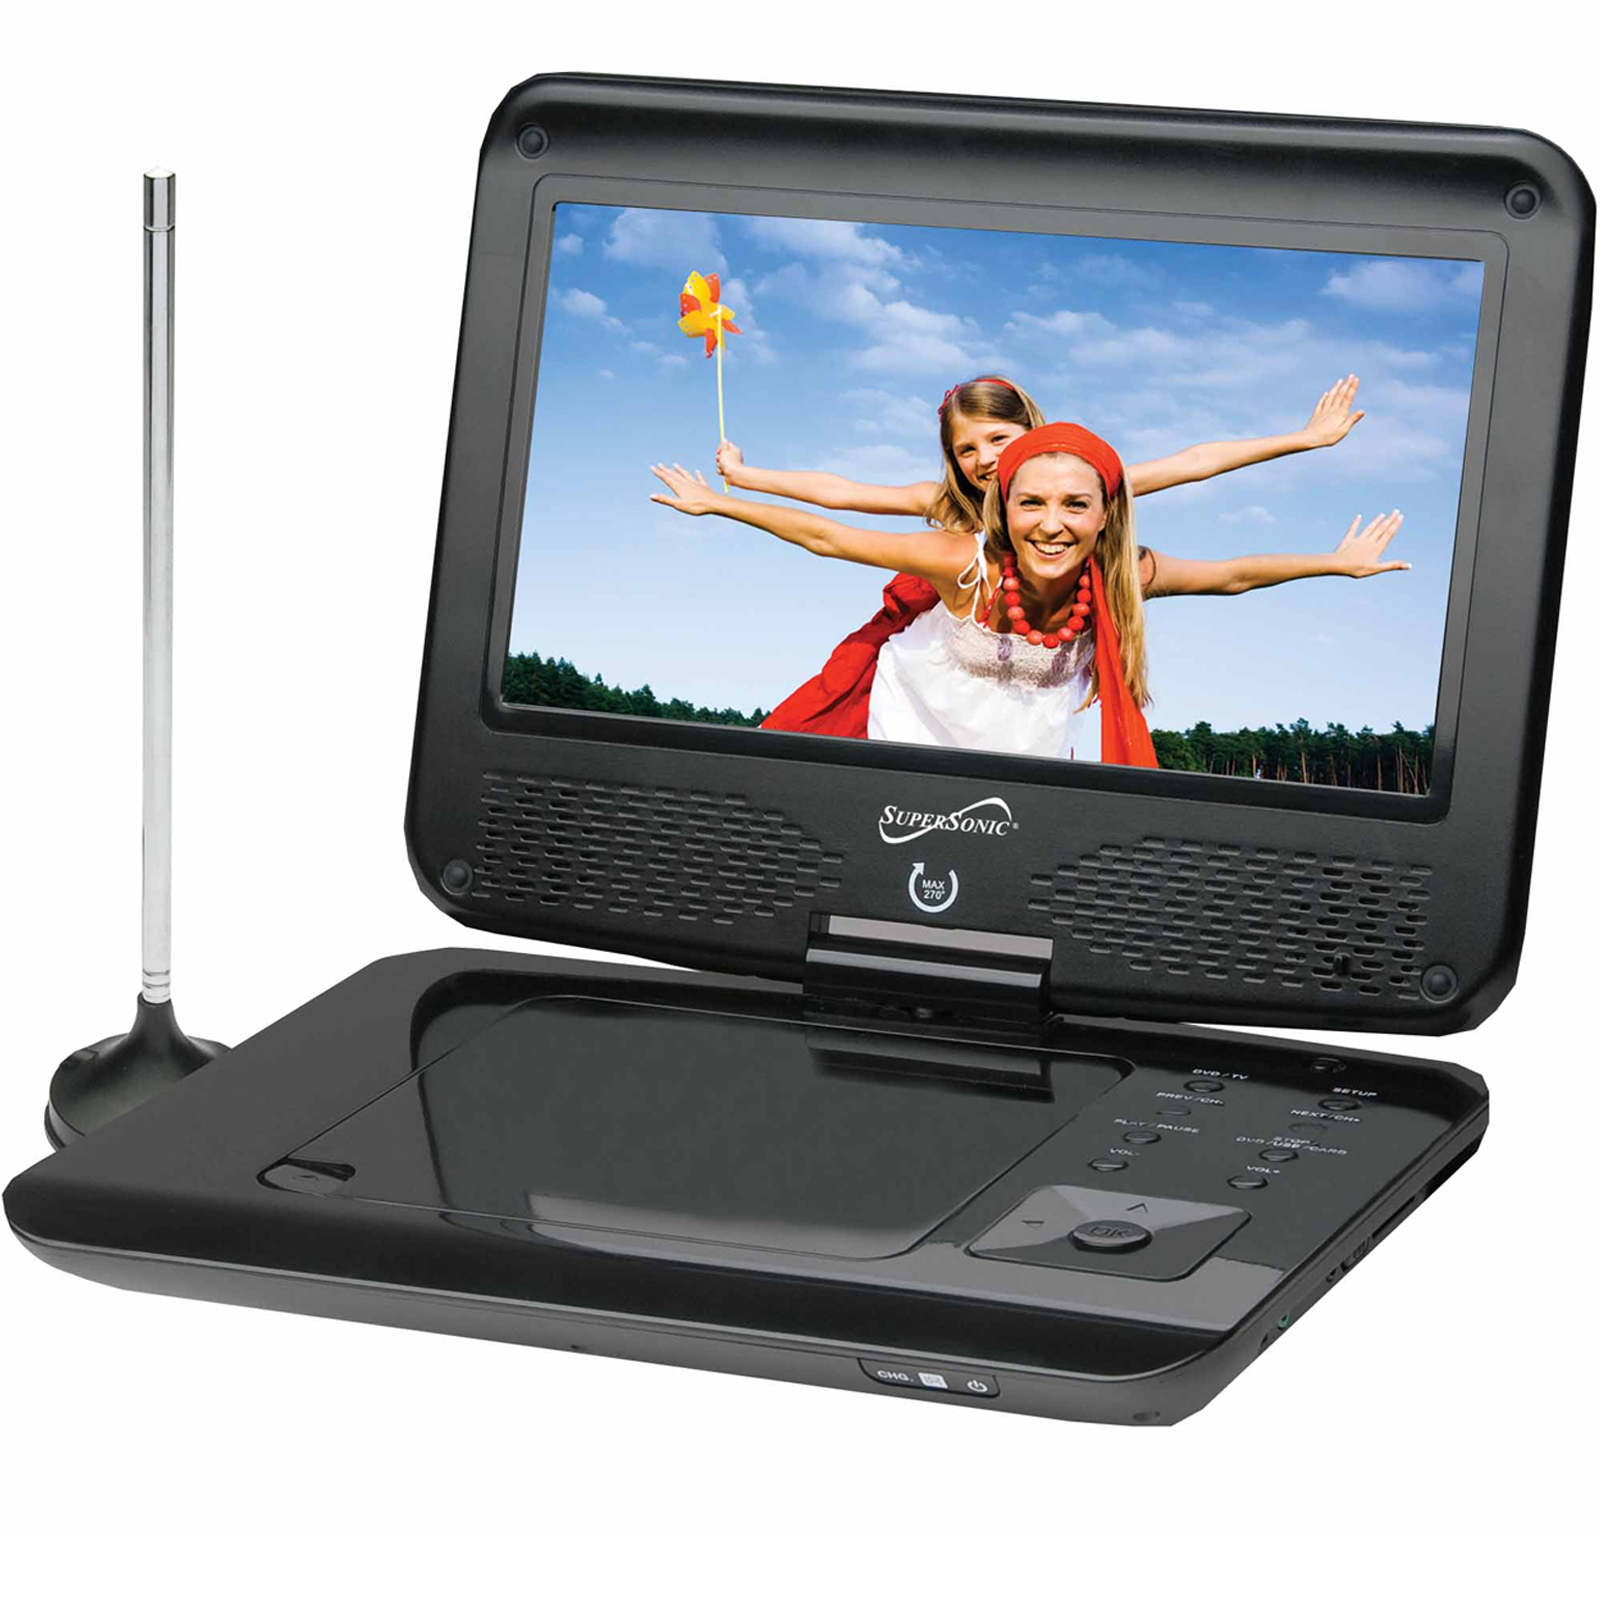 Vergissing klinker boter Supersonic 97074072M 9" TFT Portable DVD/CD/MP3 Player with TV Tuner, USB &  SD Card Slot